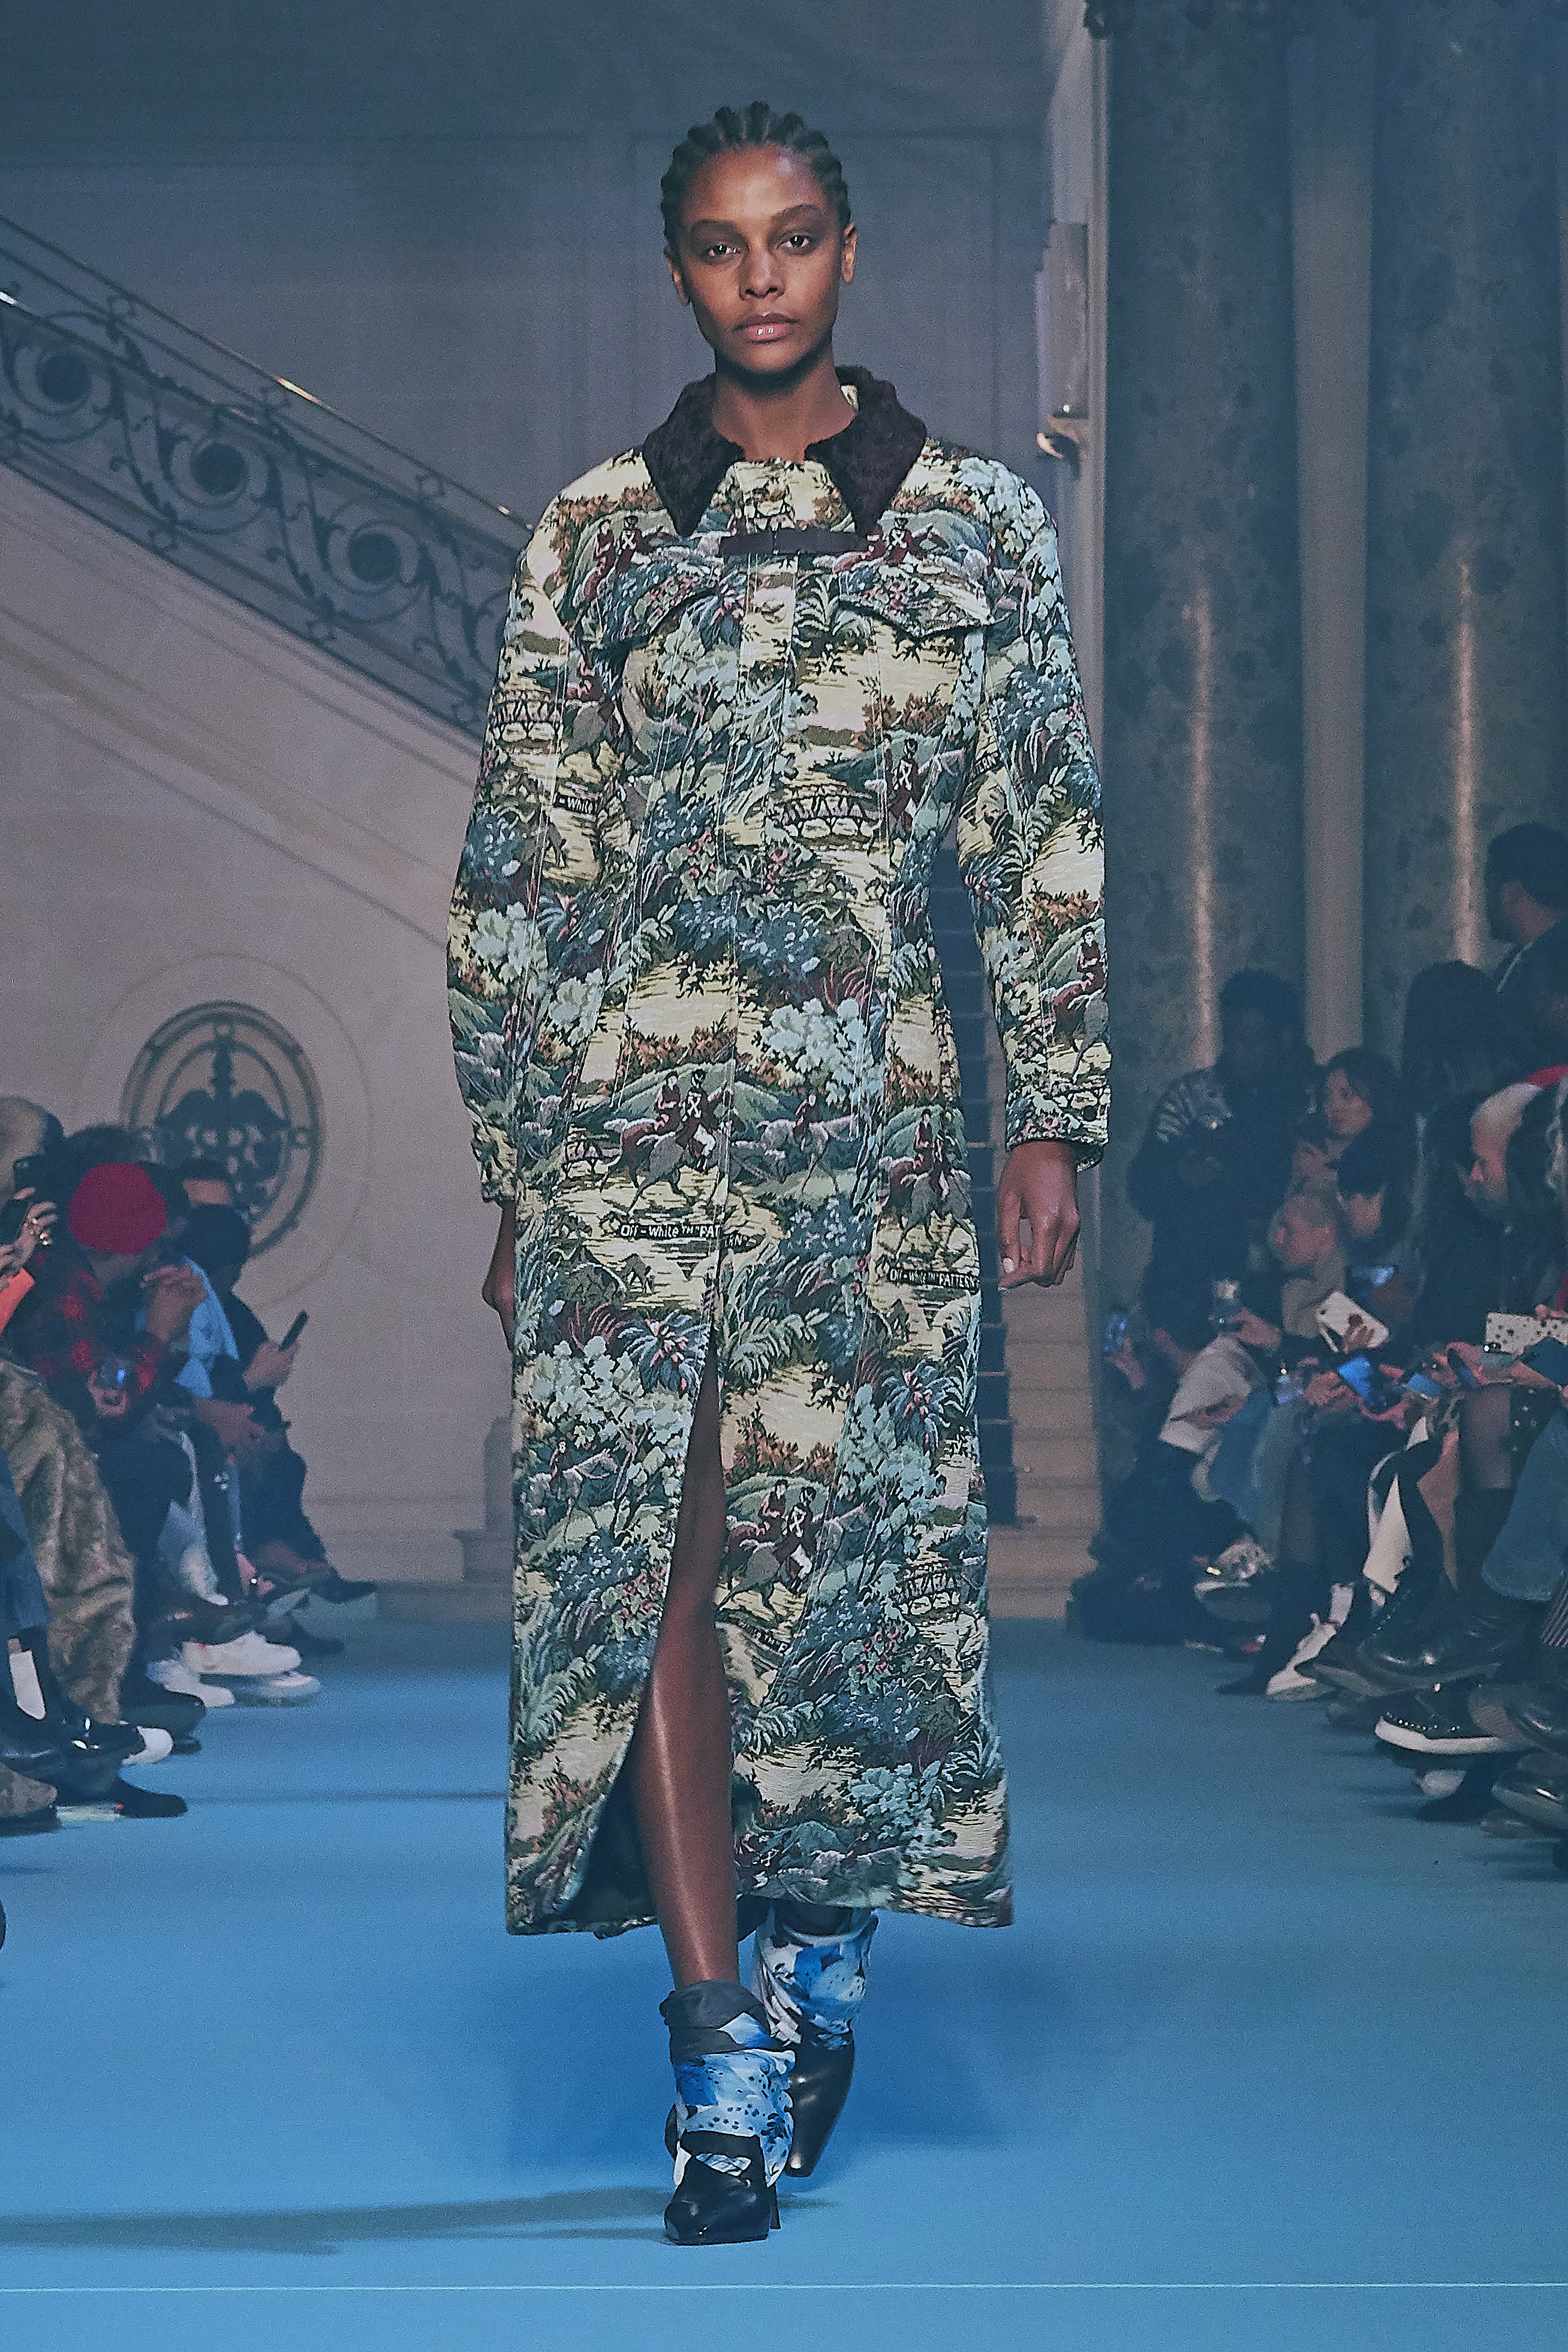 Off-White Virgil Abloh Fall Winter 2018 Paris Fashion Week Show Collection